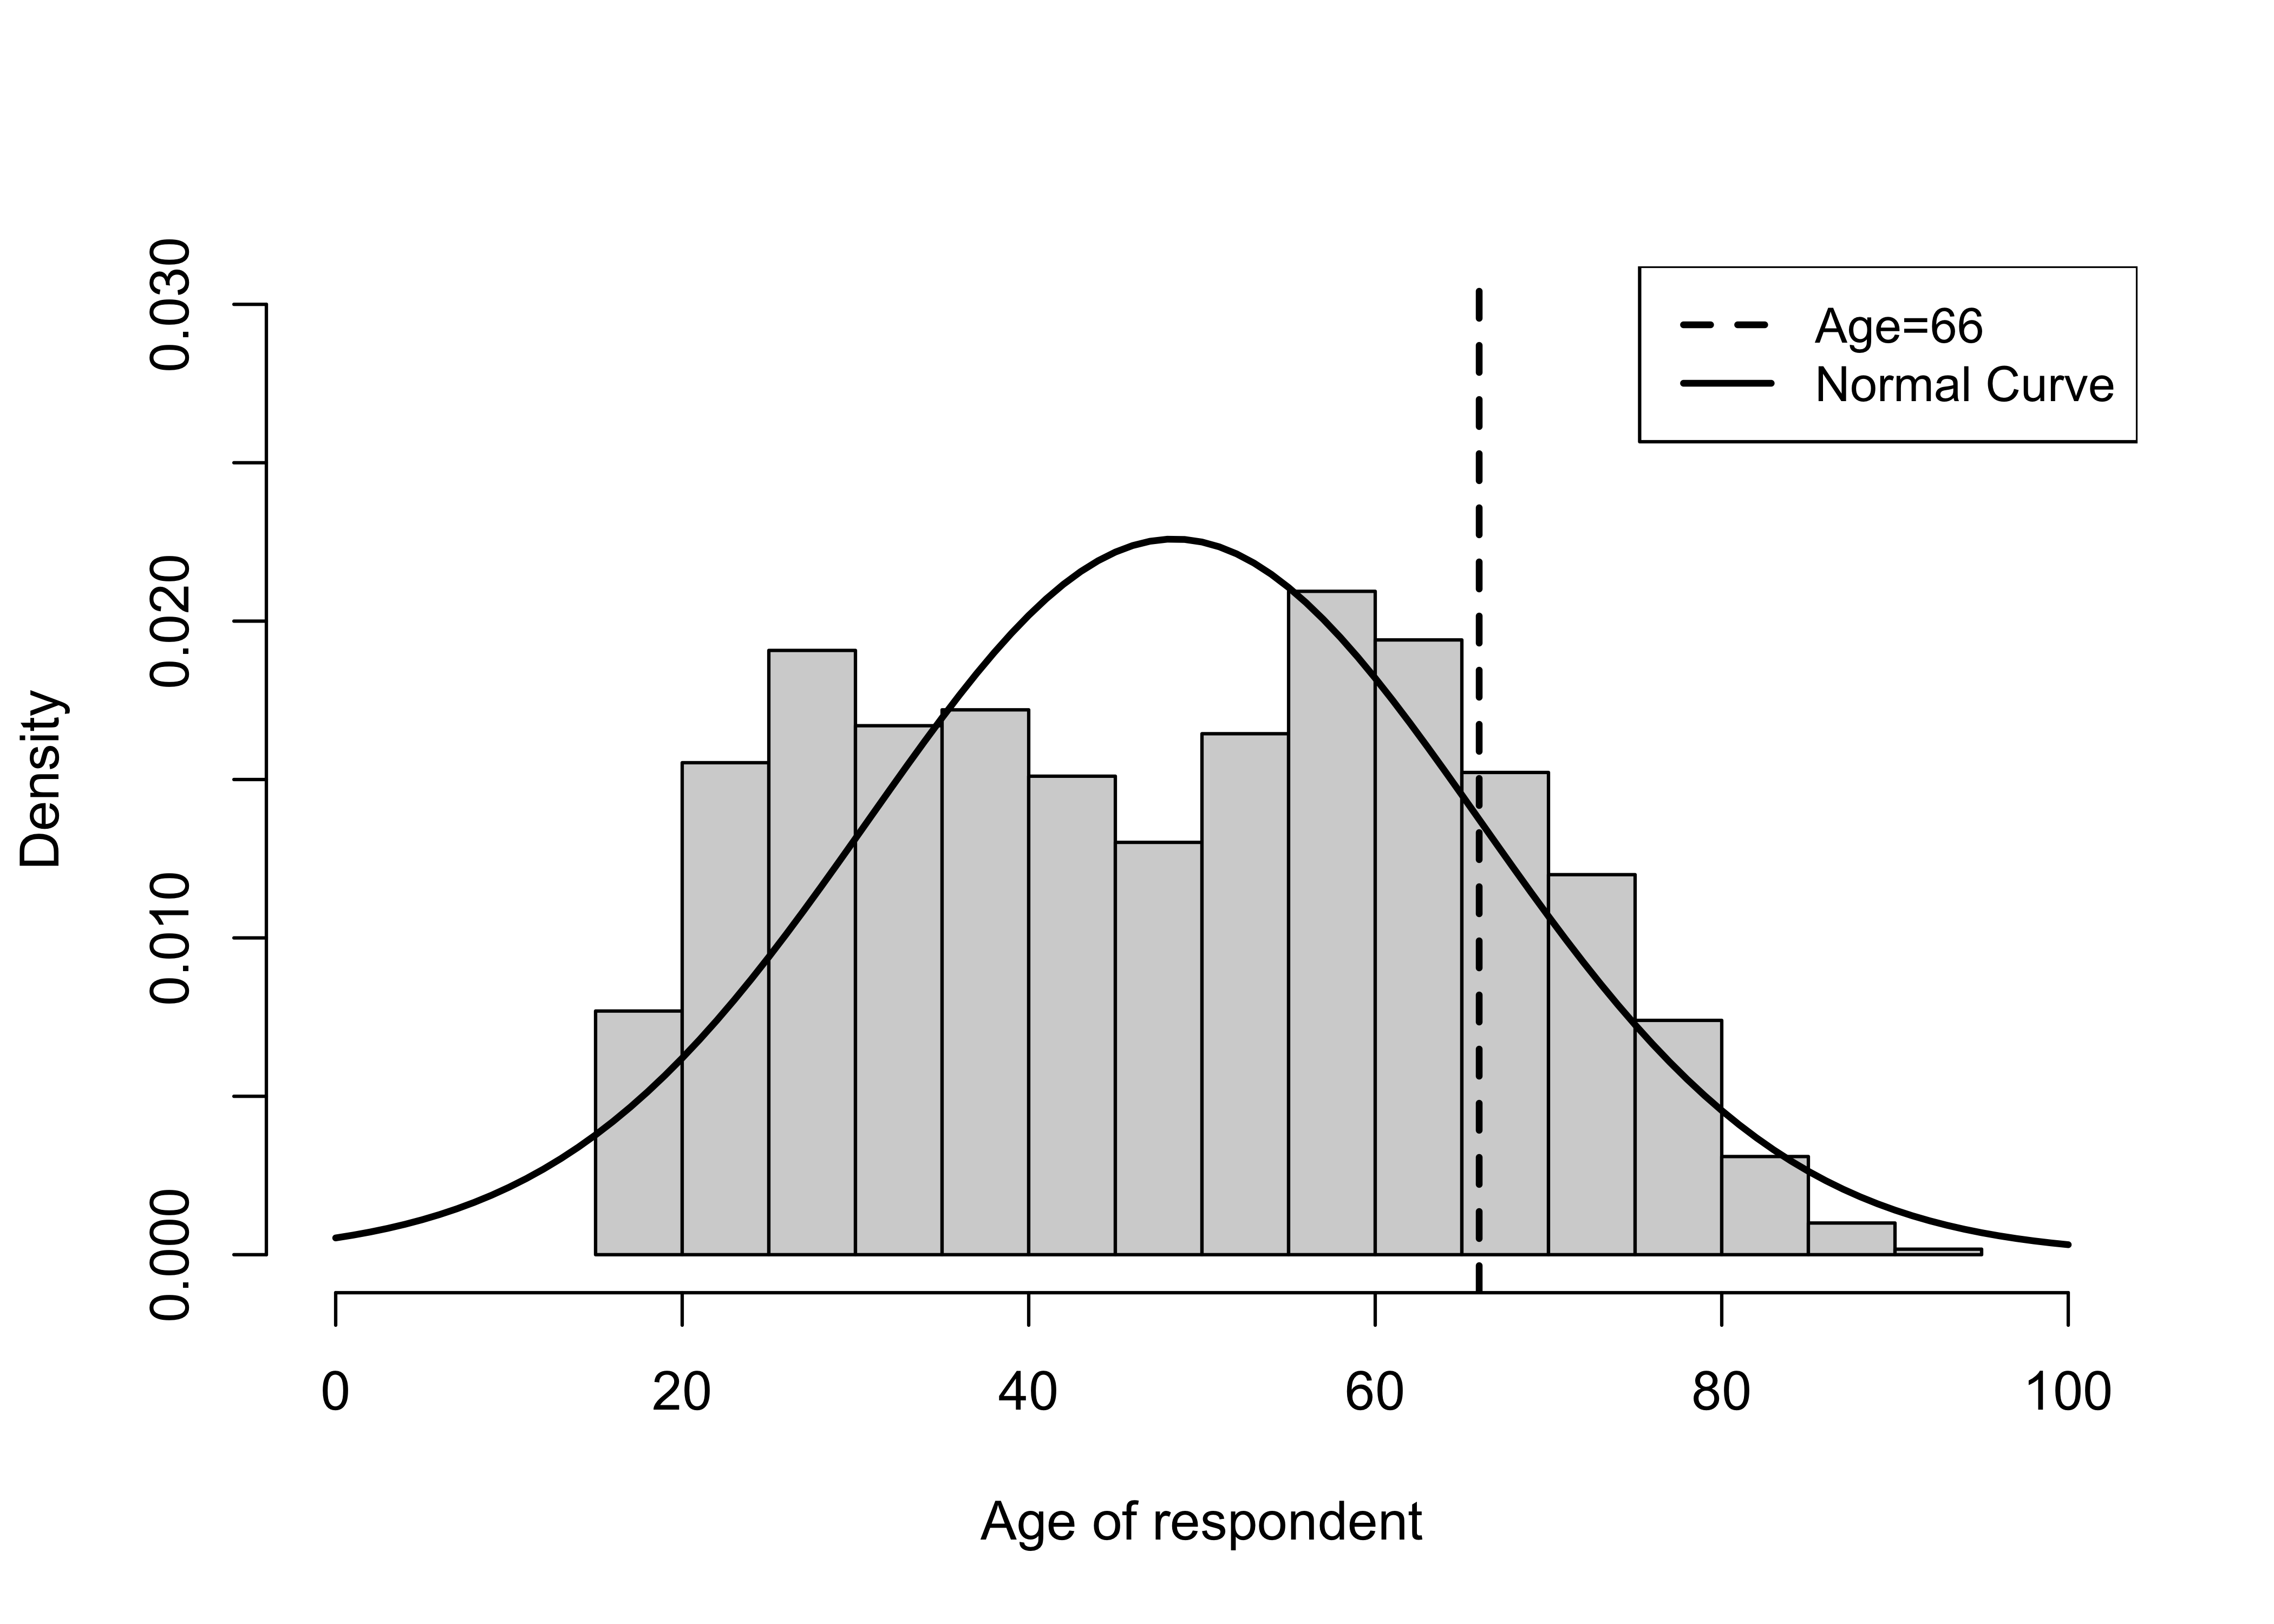 Comparing the Empirical Histogram for Age with the Normal Curve